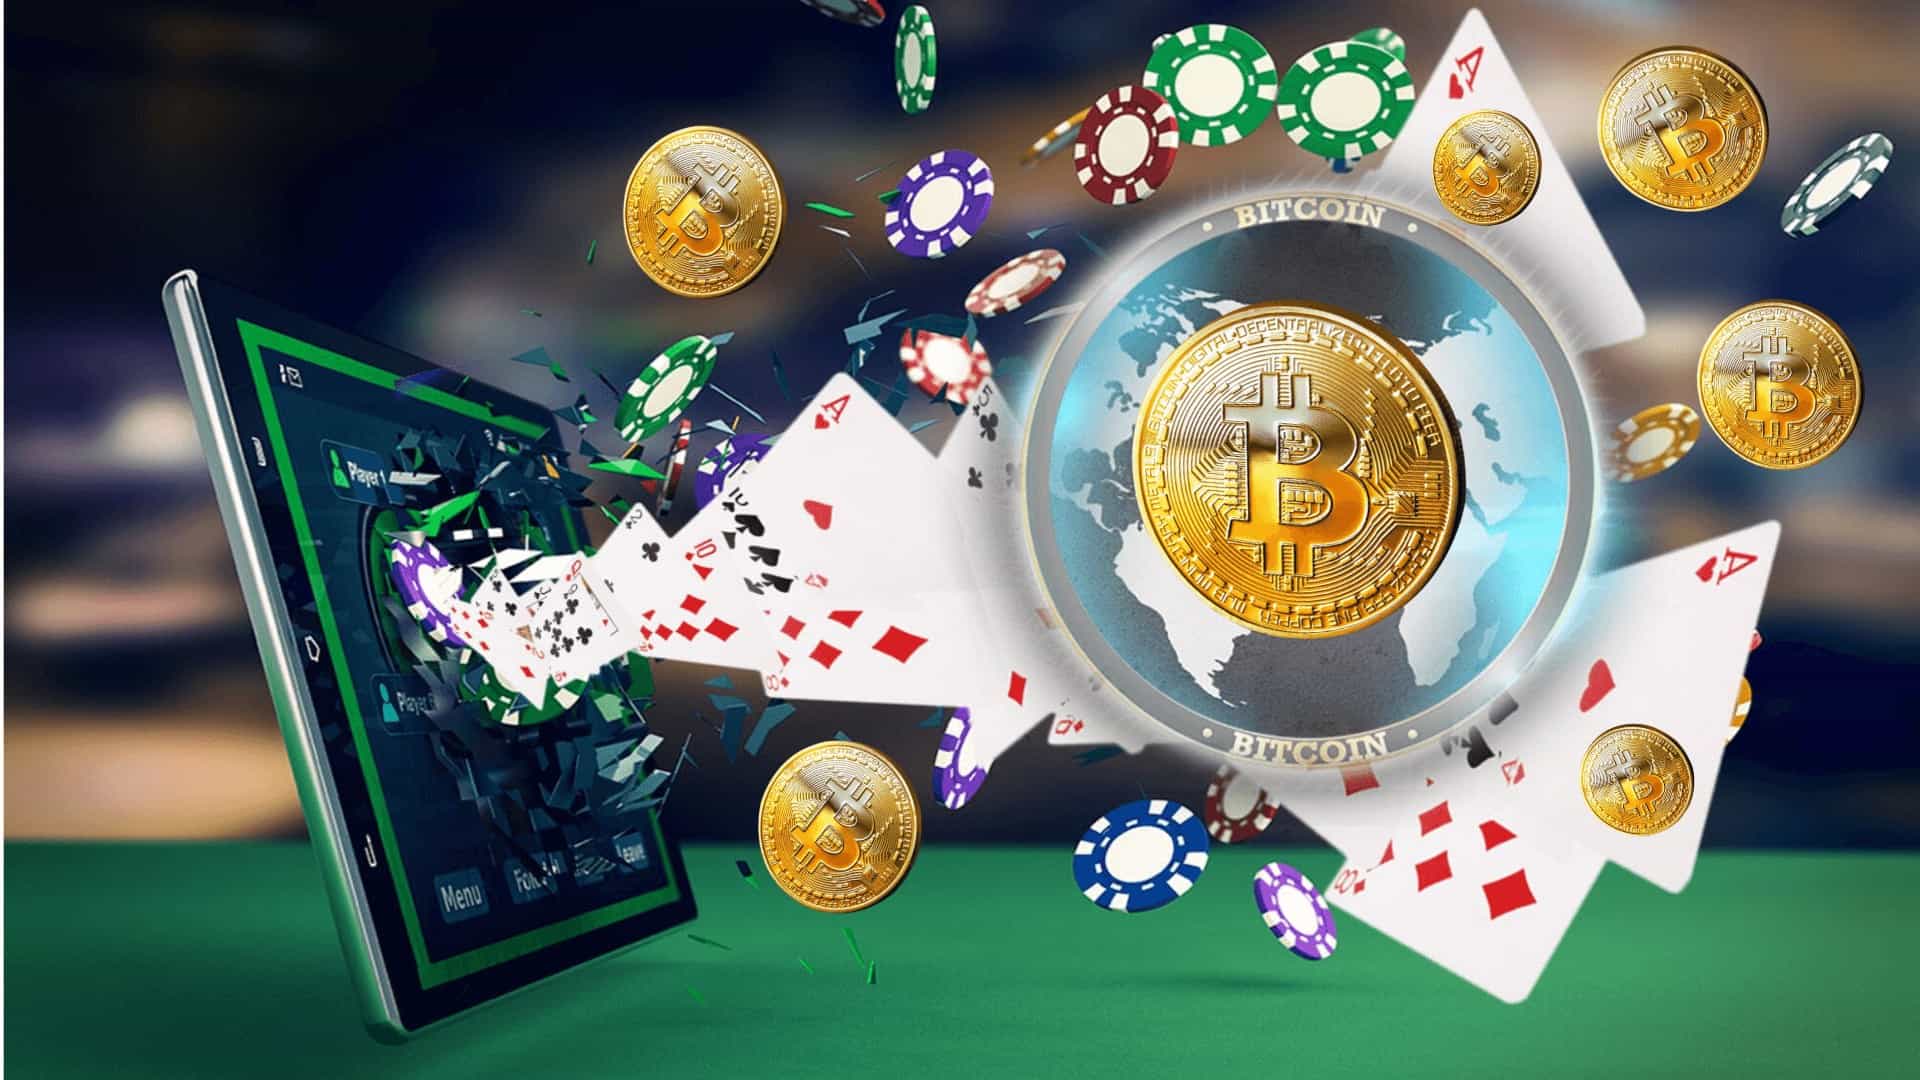 Why crypto currency casino Is No Friend To Small Business